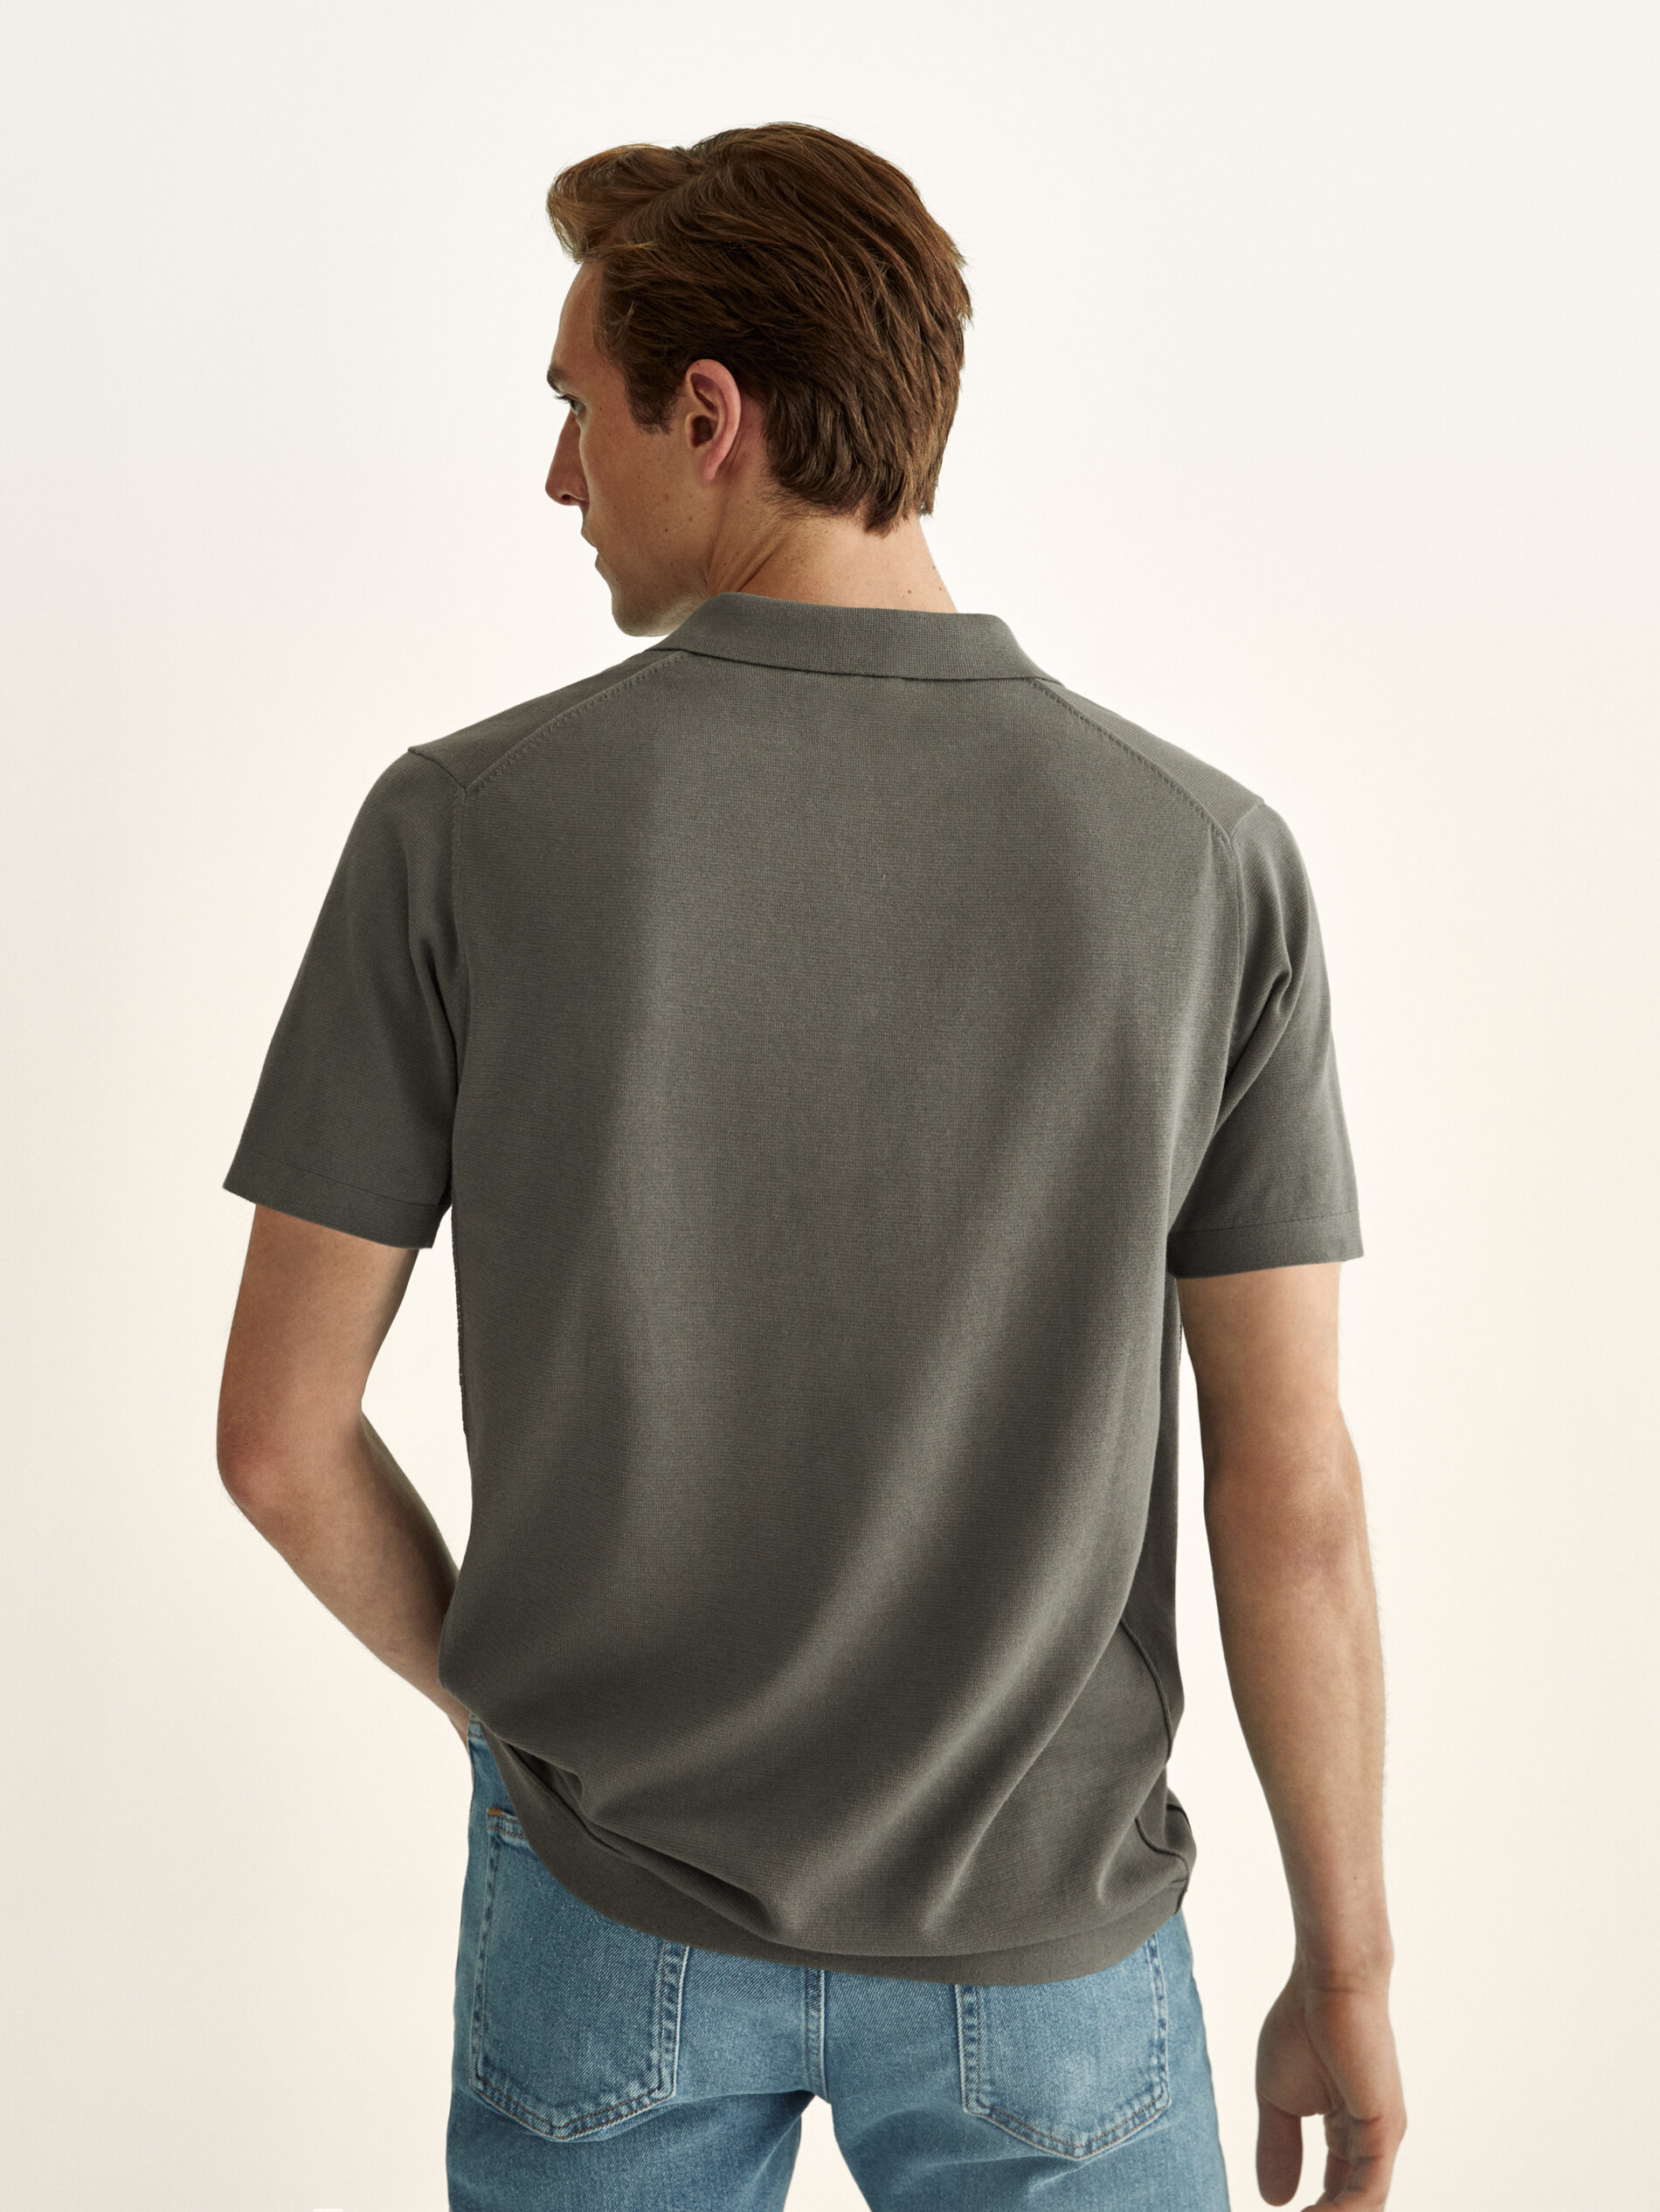 New In - Collection - JOIN LIFE - MEN - Massimo Dutti